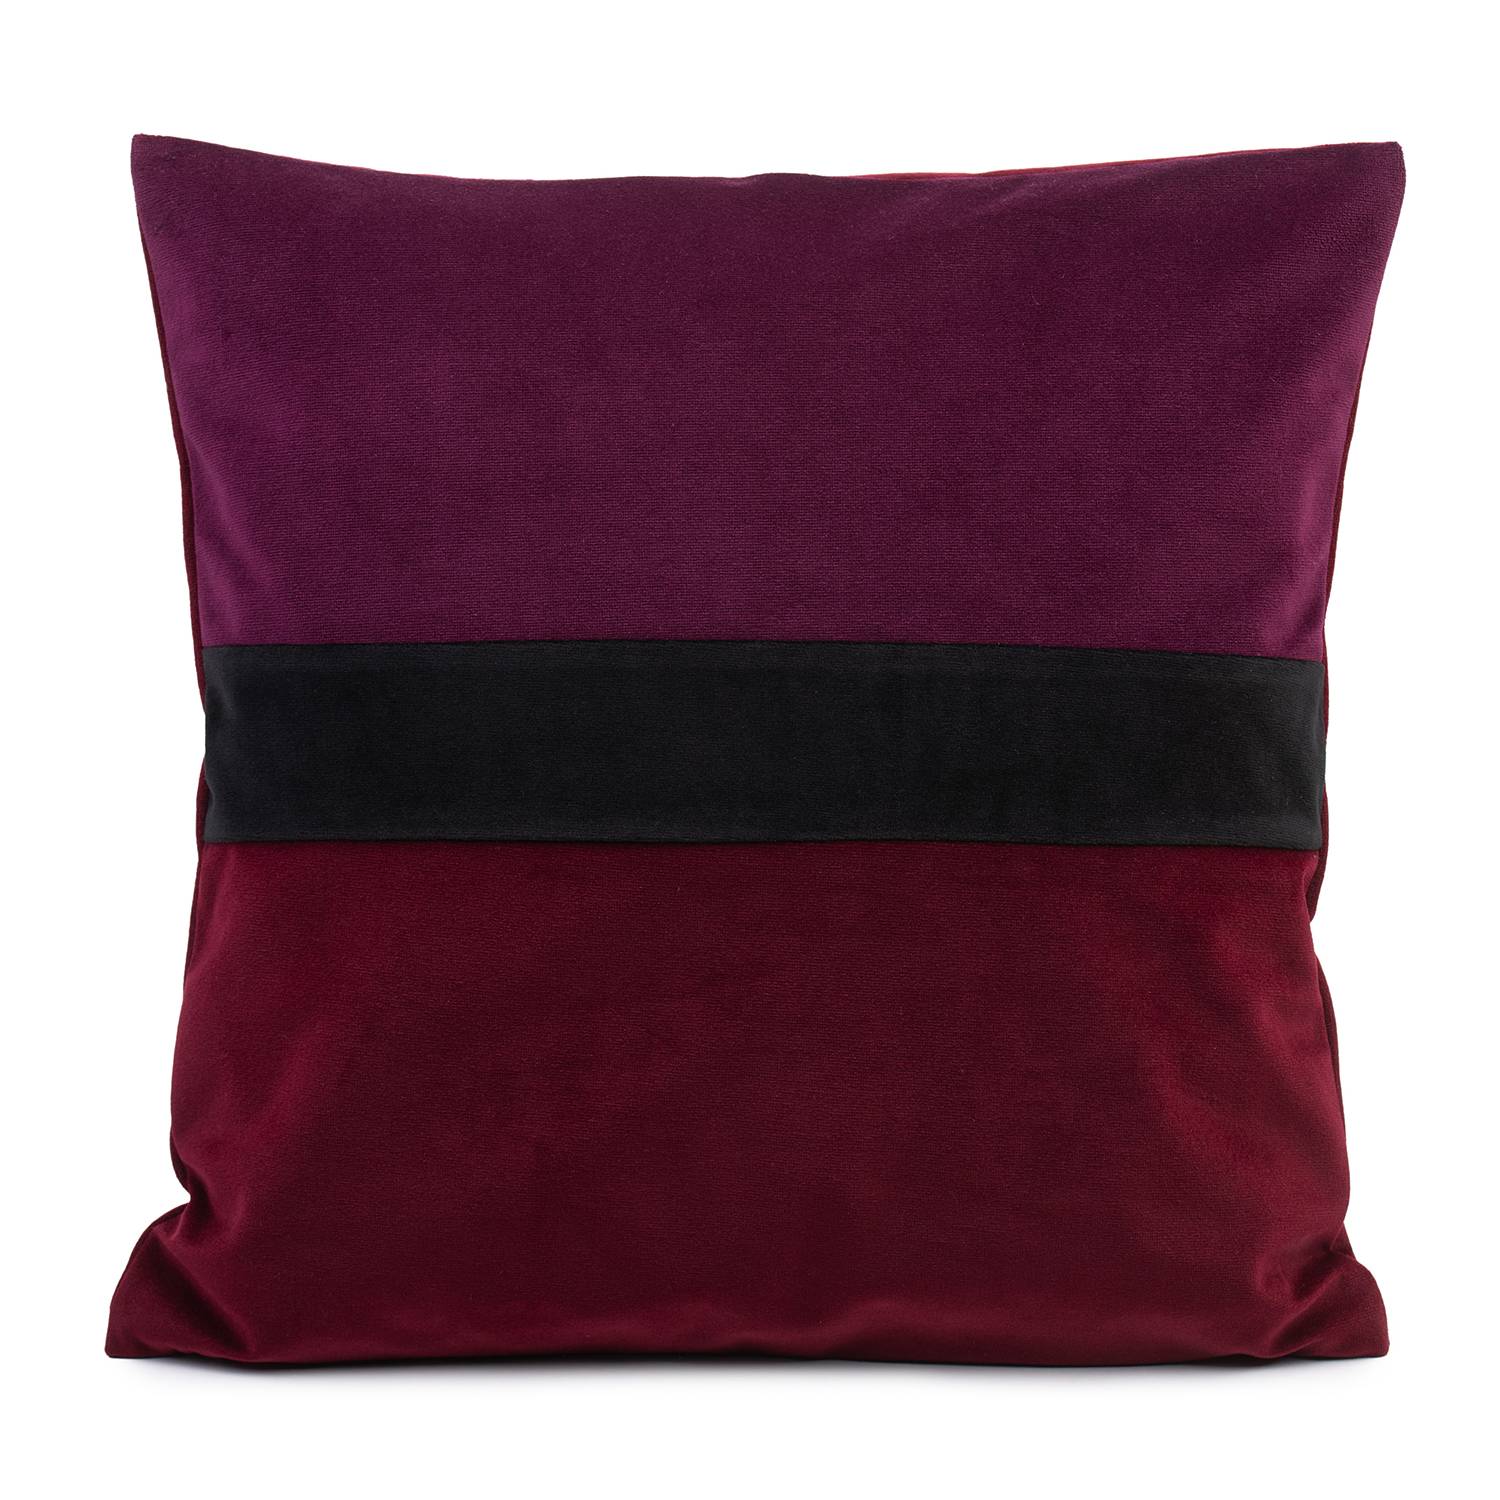 Image of Housse de coussin Pino 000000001000243550